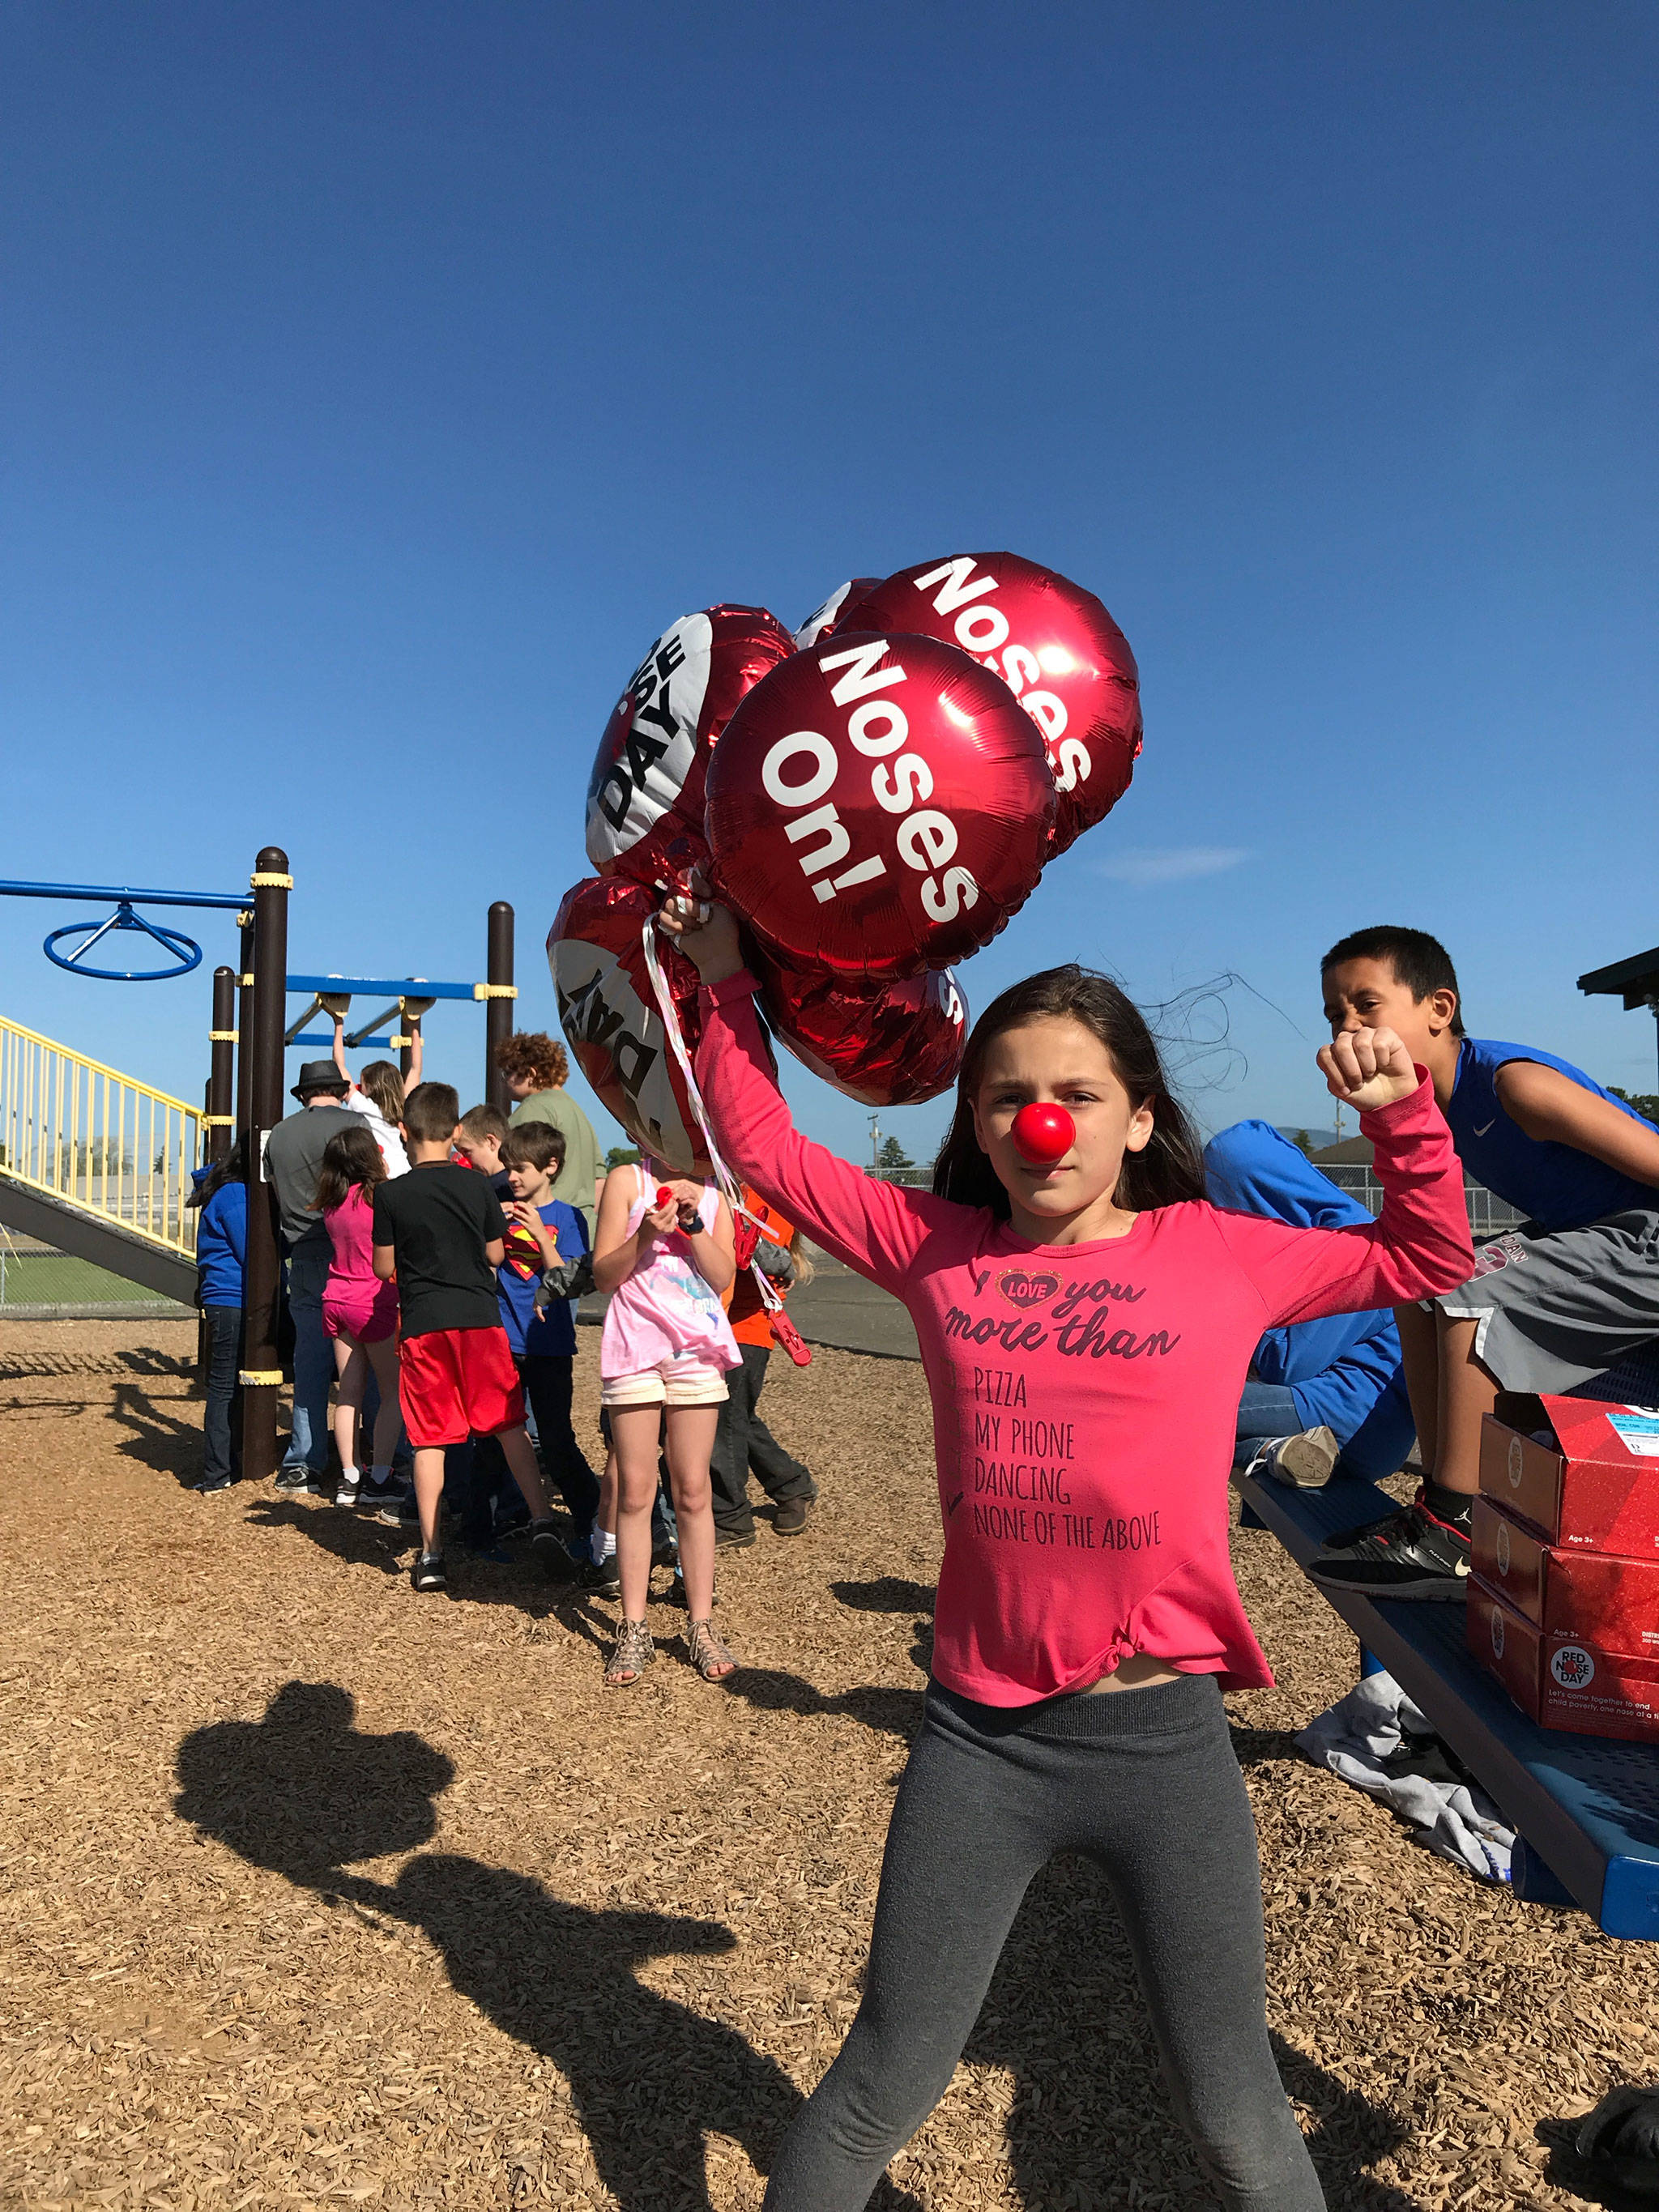 Hailey Mulet, a fifth grader at Helen Haller Elementary School, sports a red nose during the Boys & Girls Club’s Ninja Warrior event on May 24 as part of an international campaign to end child poverty. Sequim Gazette photos by Erin Hawkins